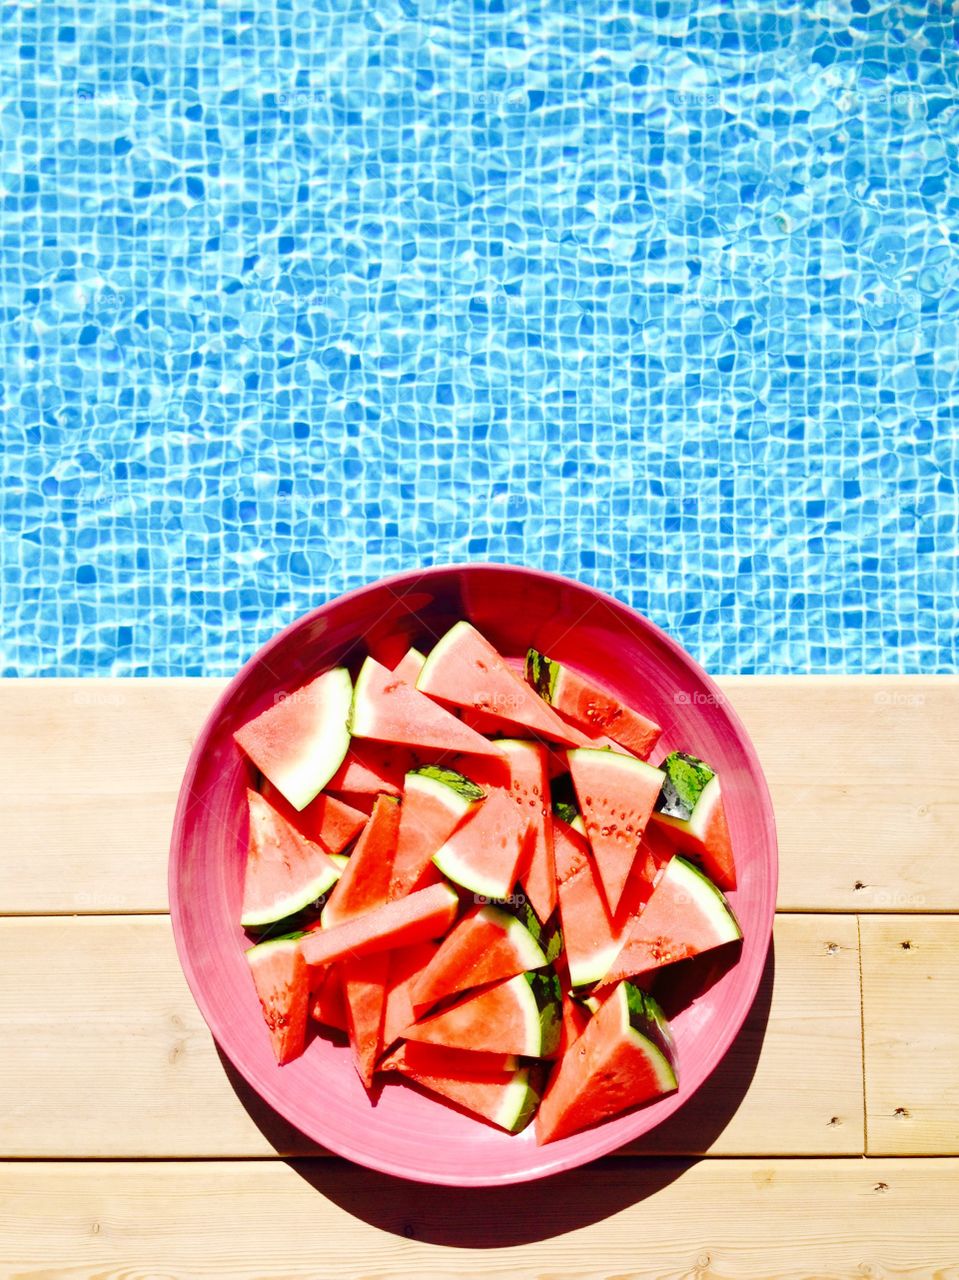 Pool day with watermelon. Picture taken in Stockholm, Sweden m